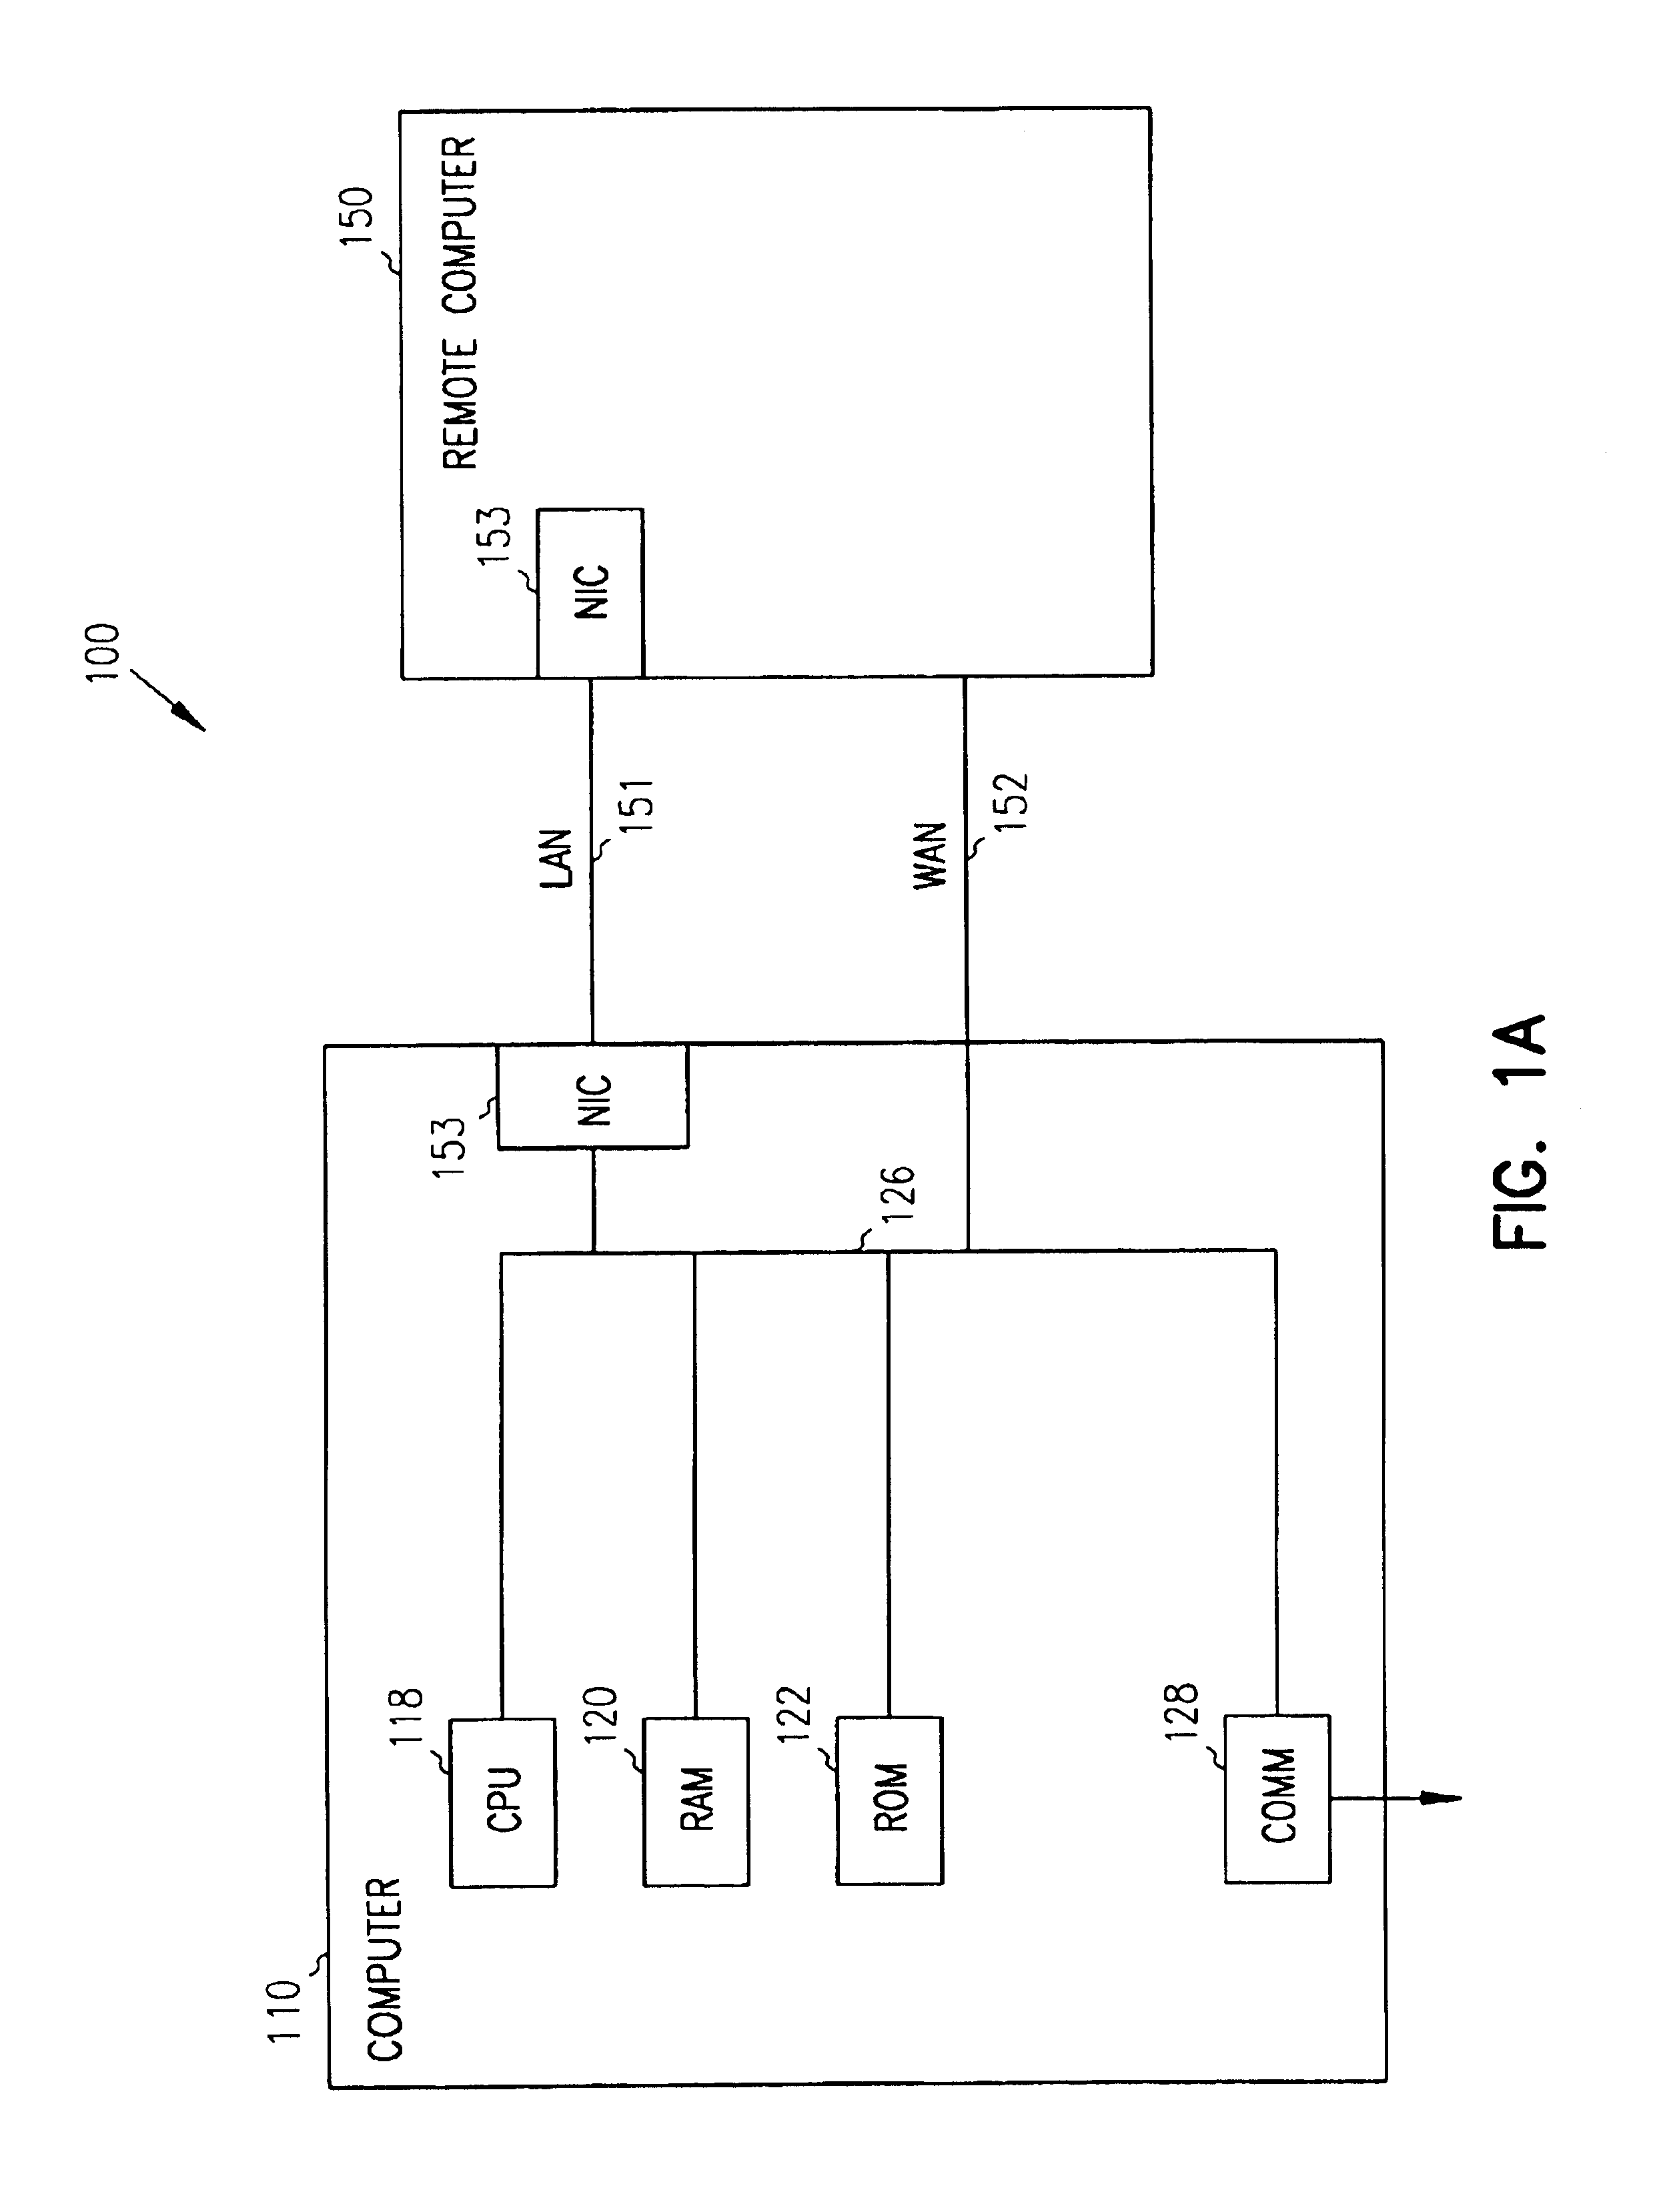 System and method for a hierarchical system management architecture of a highly scalable computing system